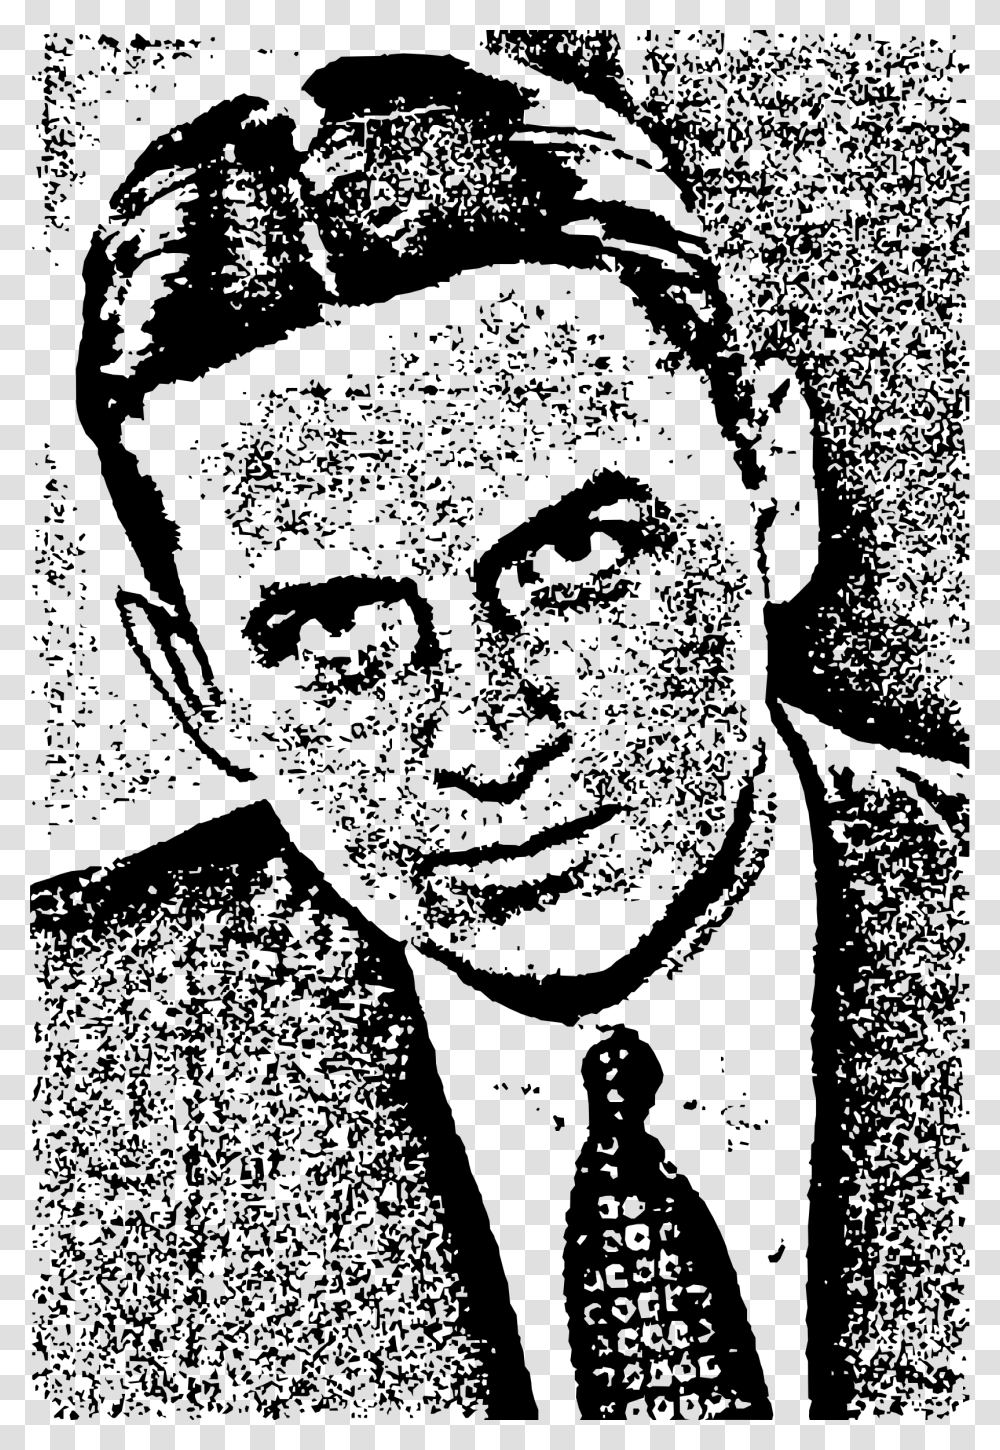 Eliot Ness And The Untouchables Clip Arts Eliot Ness, Gray, World Of Warcraft Transparent Png